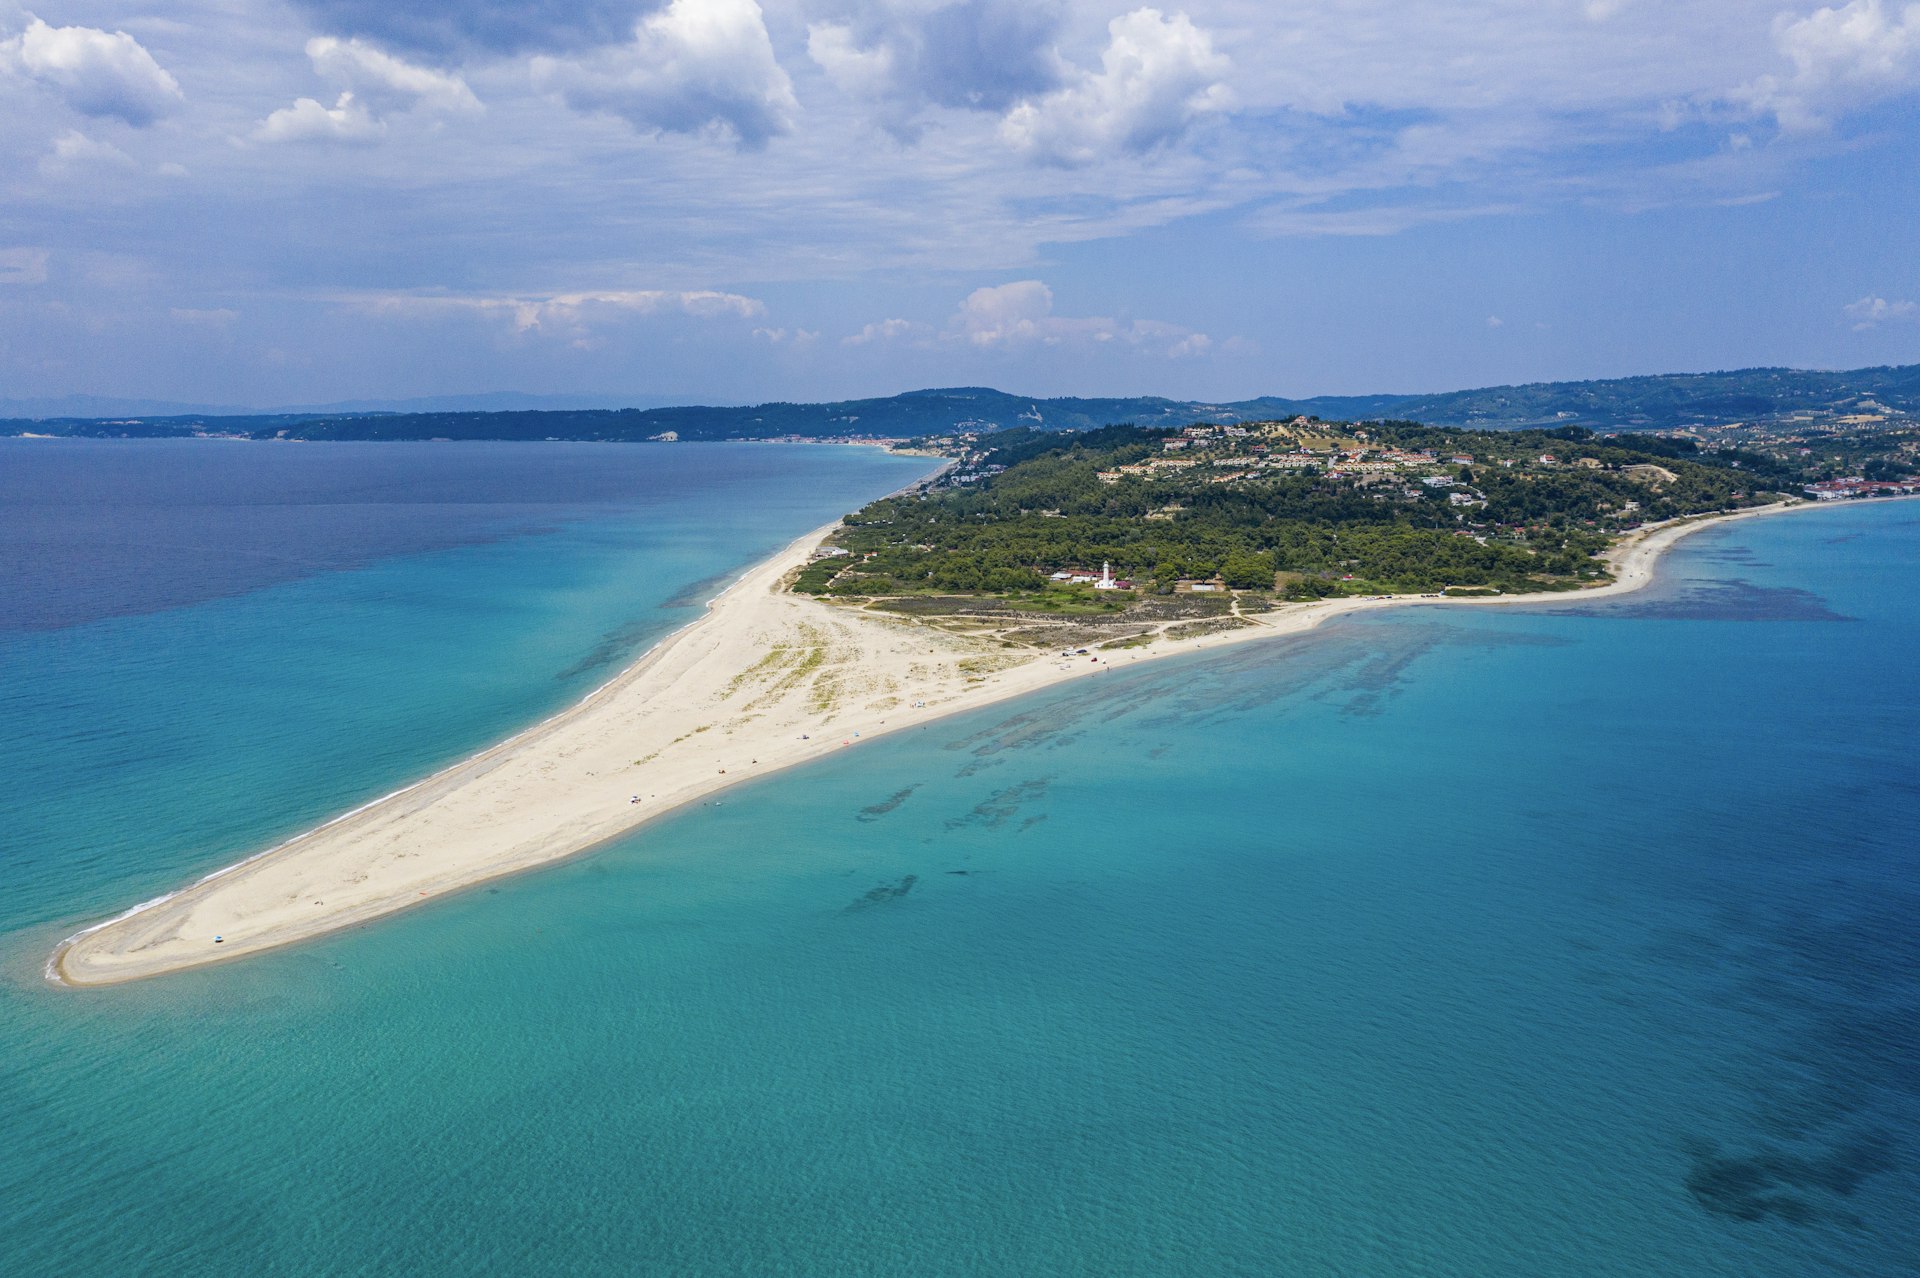 An aerial view of Possidi Beach in summer. The beach is uniquely triangular in shape, protruding from a forested island.